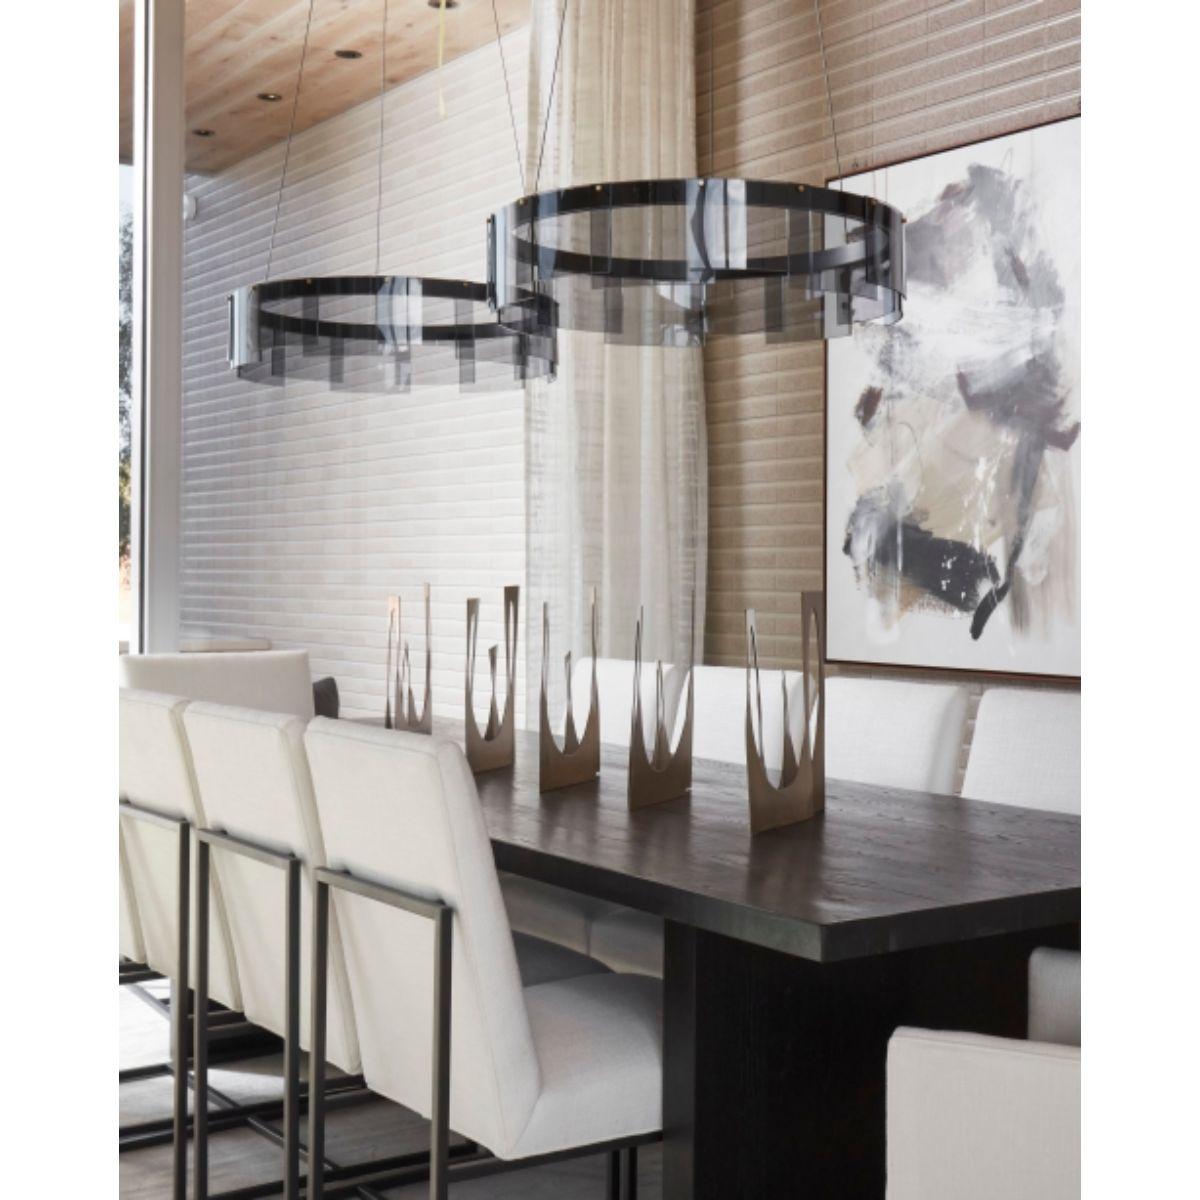 Stratos 31 in. LED Chandelier